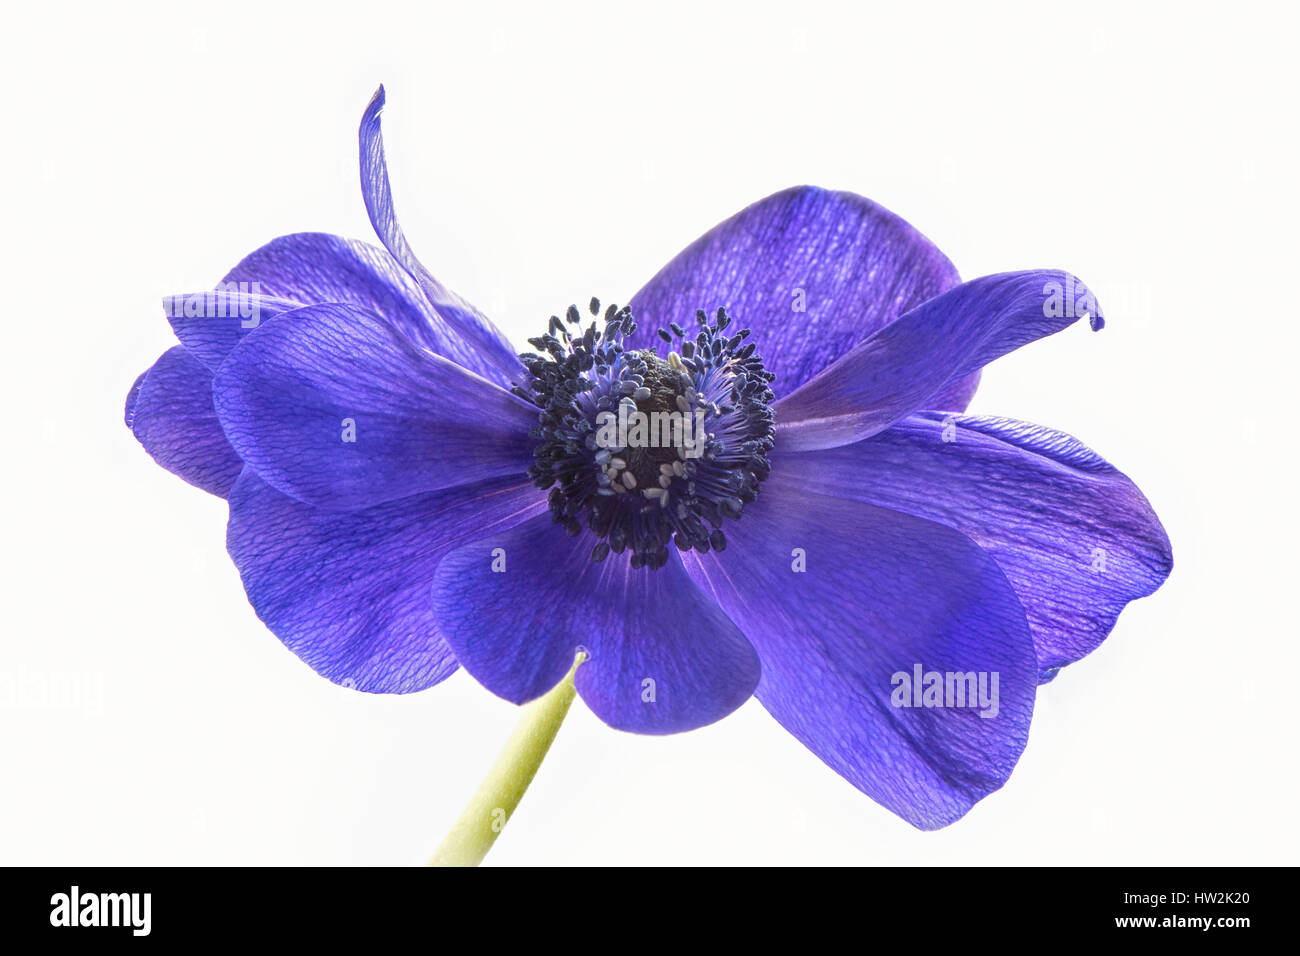 High-key image of the beautiful spring flowering Anemone de Caen purple flower, also known as the windflower, taken against a white background Stock Photo